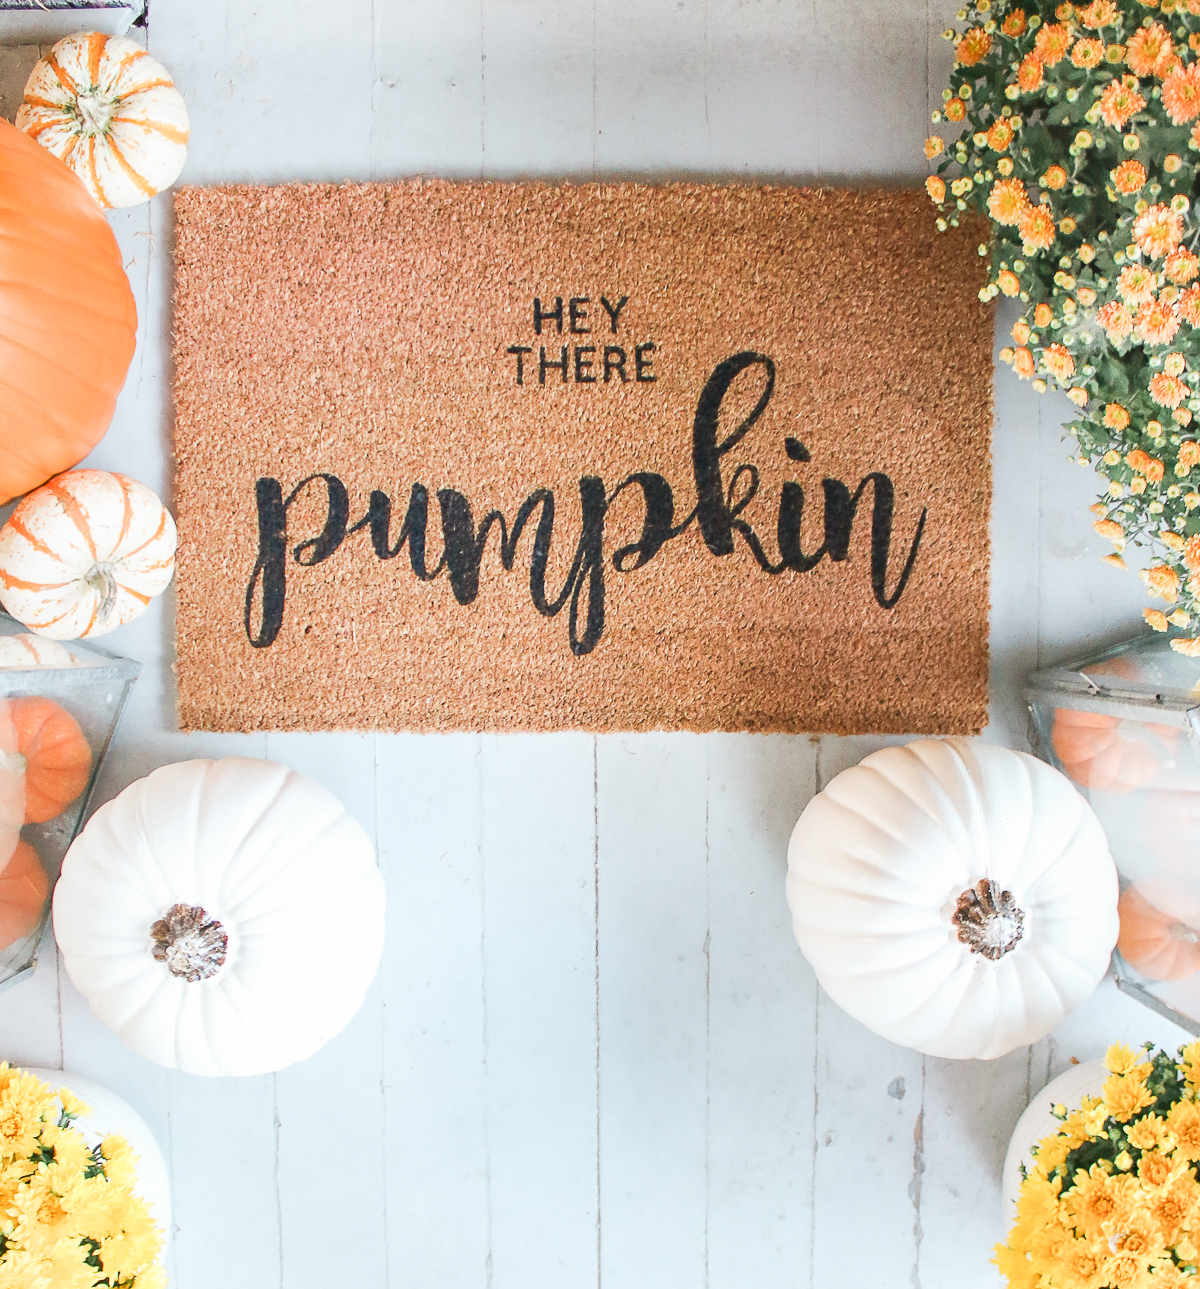 How to design your own doormat, DIY Hey There Pumpkin Doormat: How to Make Stencils with a Cricut Explore Air by southern lifestyle blogger Stephanie Ziajka from Diary of a Debutante, DIY Hey There Pumpkin Doormat, DIY Cricut doormat, how do I make a stencil with my Cricut, making stencils with the Cricut Explore Air